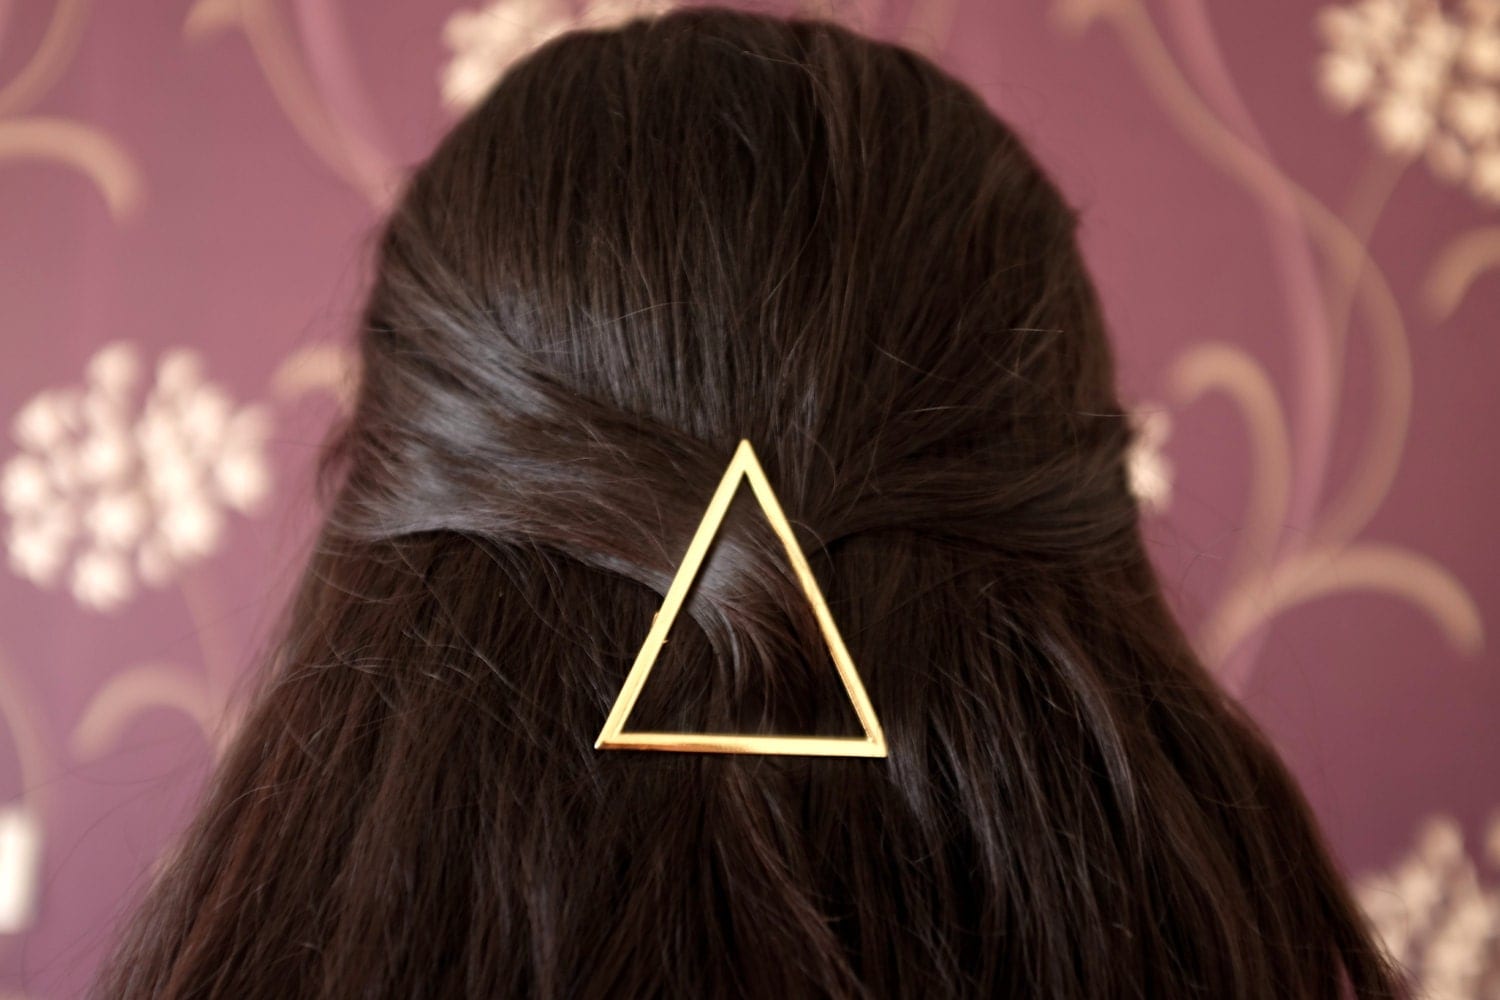 Vintage Punk Gold Plated Triangle Hair Clip Hairpin Hair Accessory